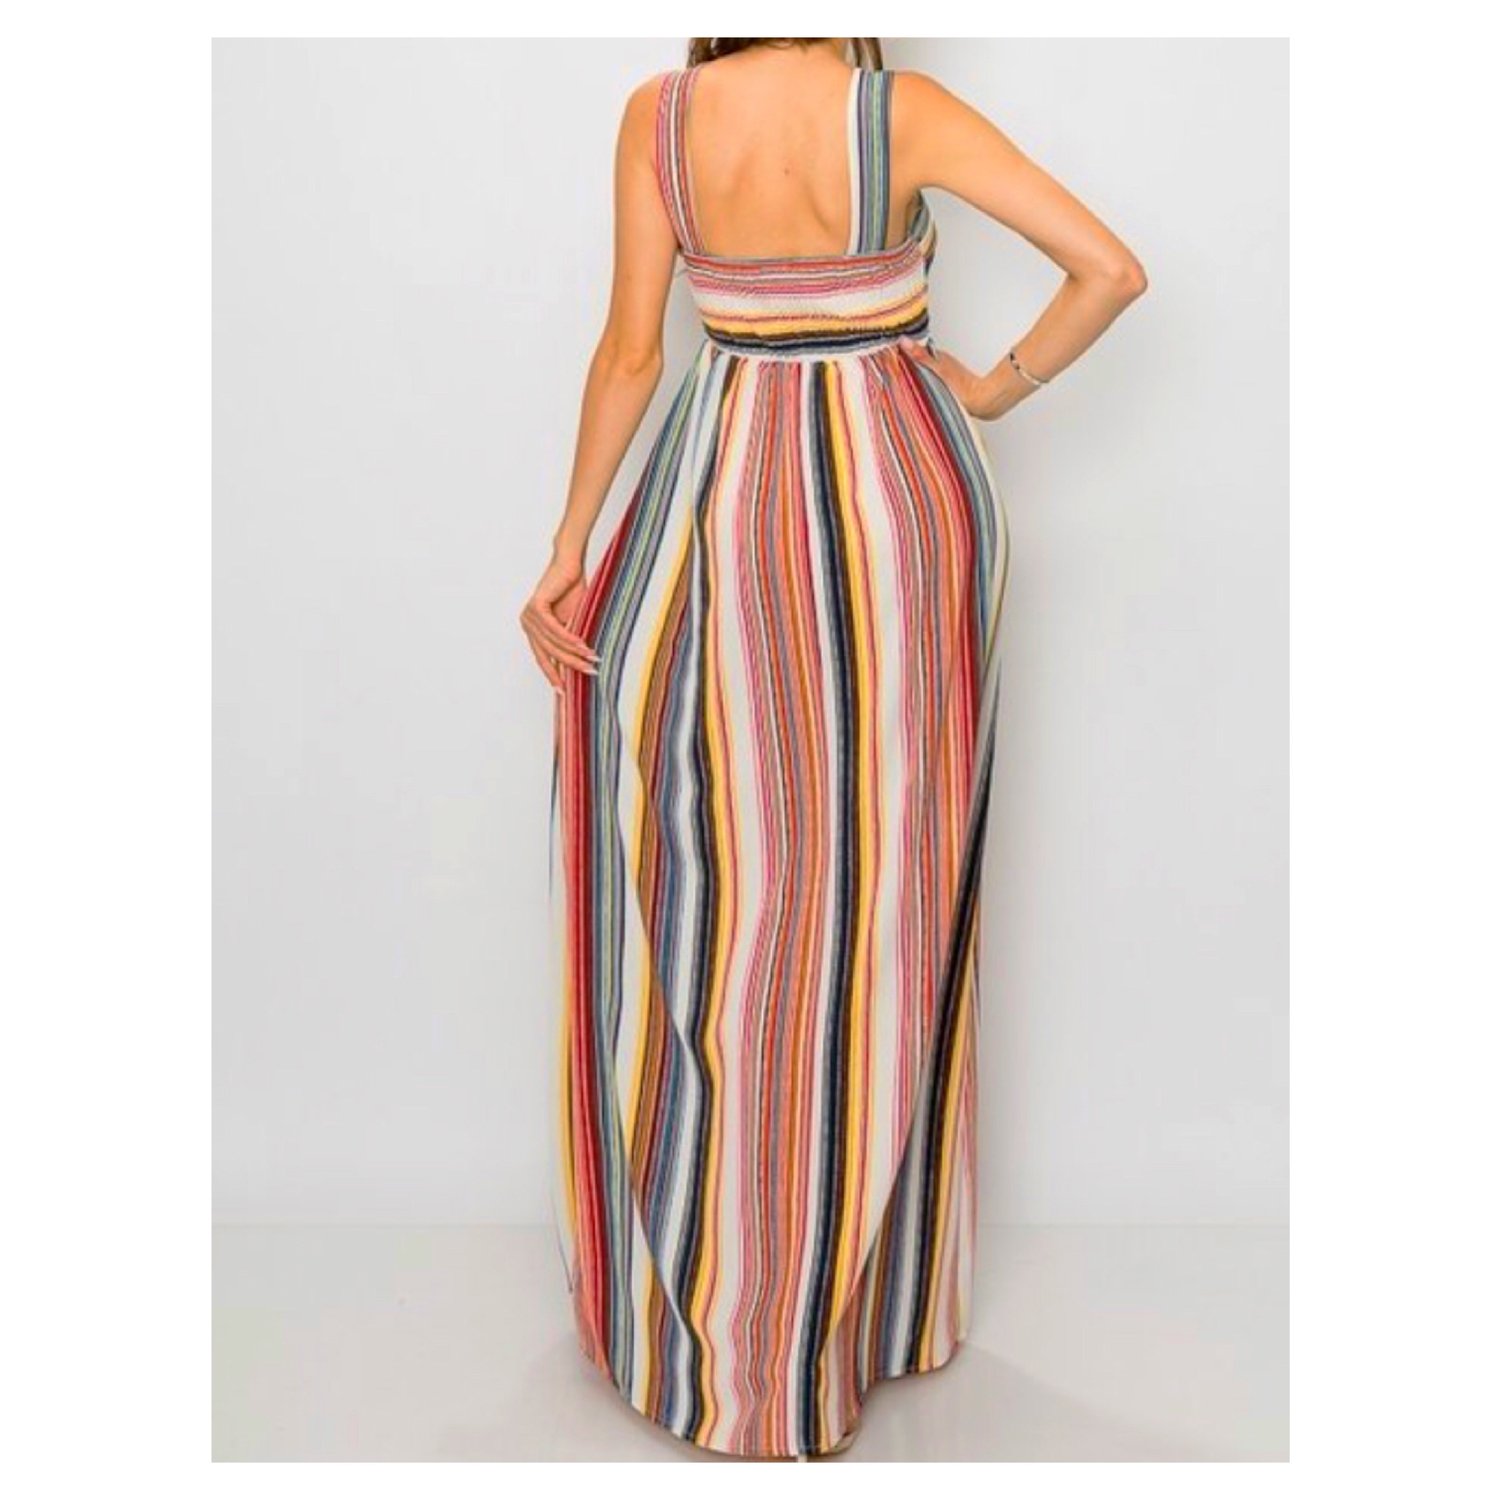 Image of Cassidy Striped Maxi